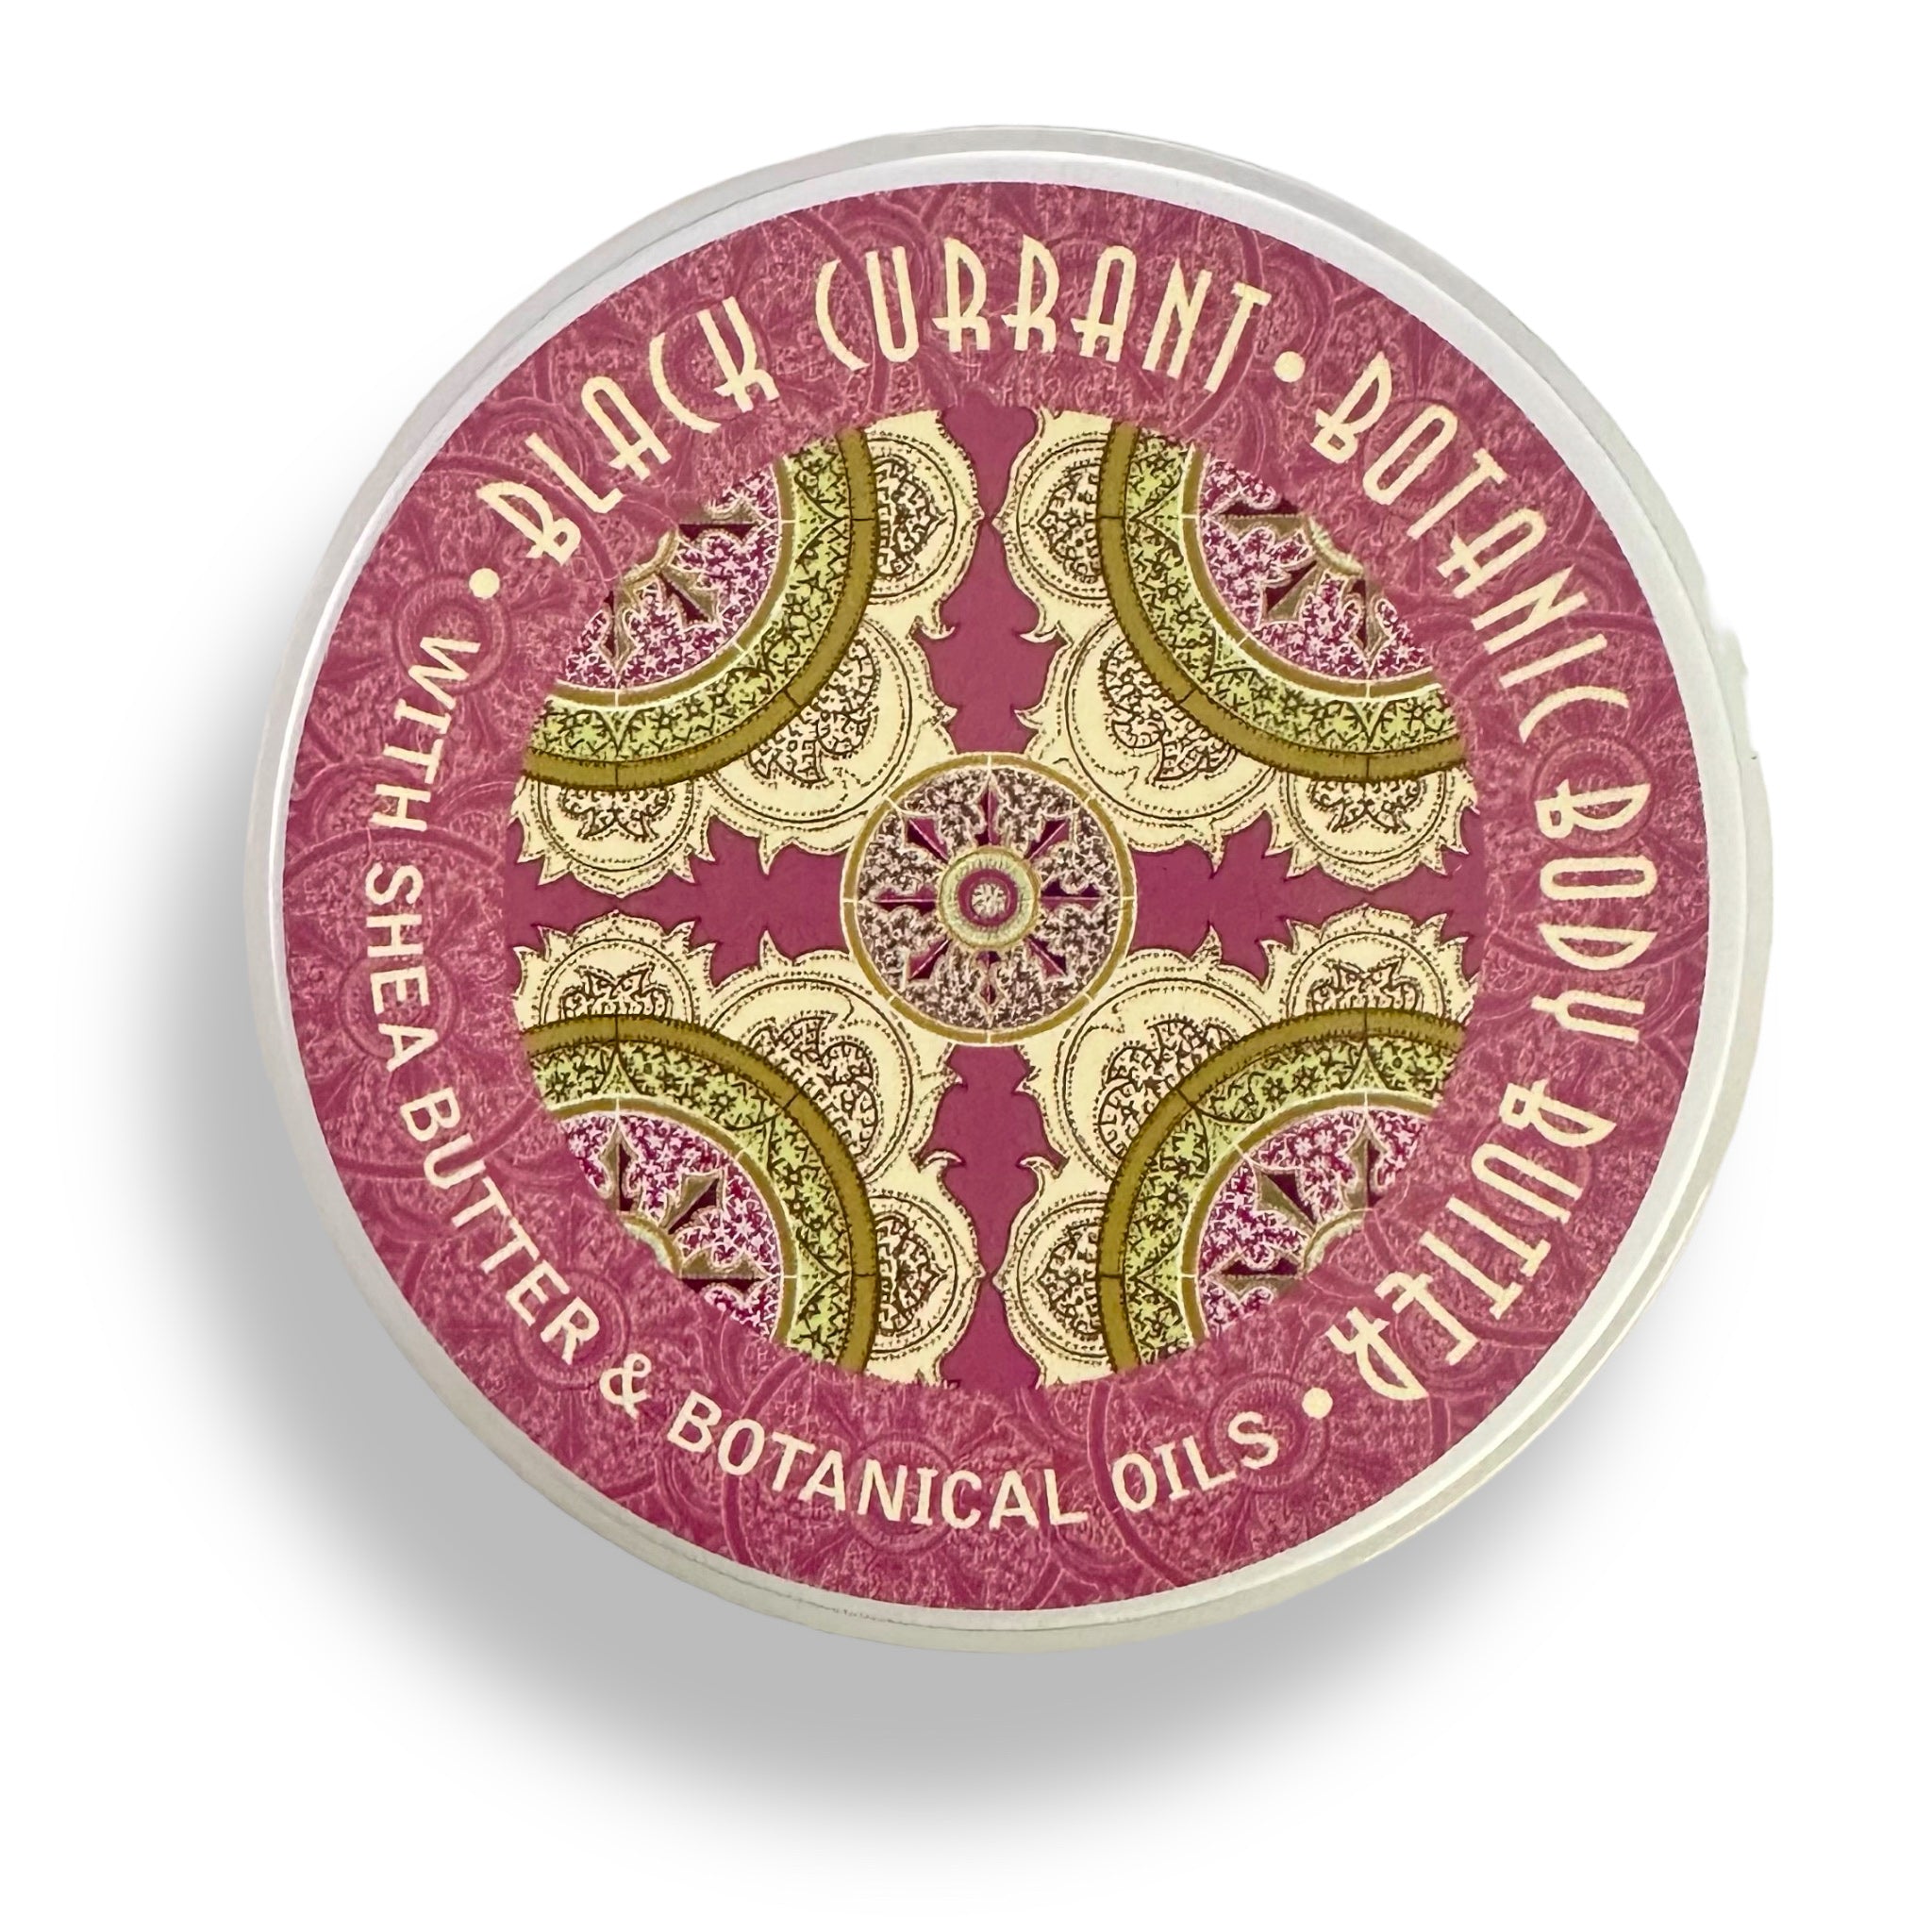 BLACKCURRANT & OLIVE Body Butter Greenwich Bay Trading Company